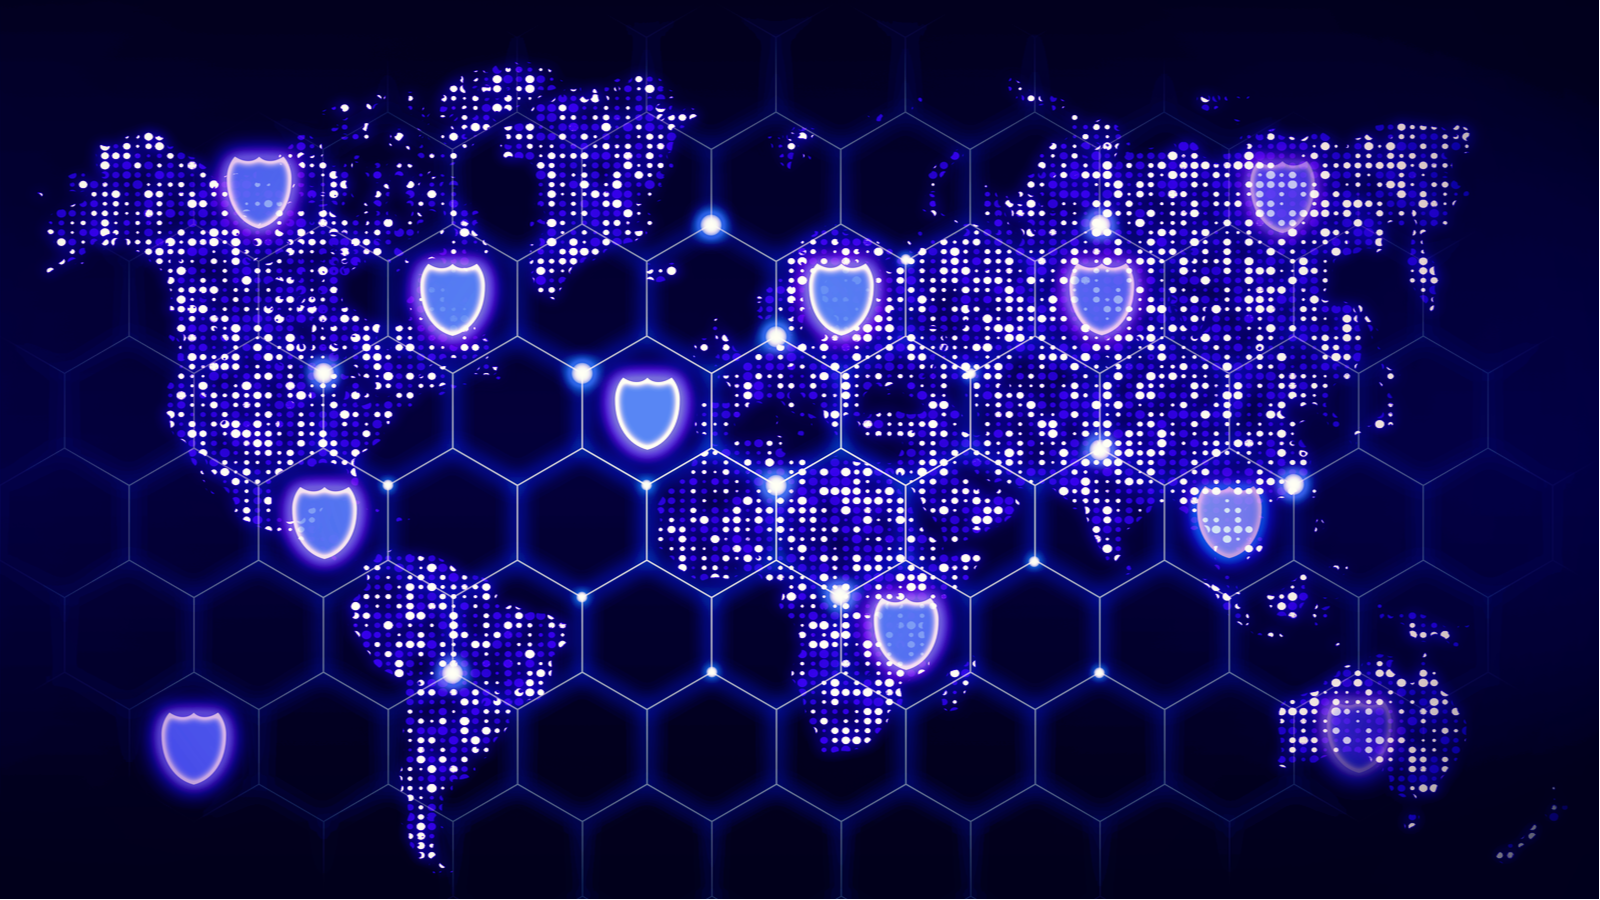 KNBE stock. An image of a hexagon network covering the world map with glowing data centers and shield symbols